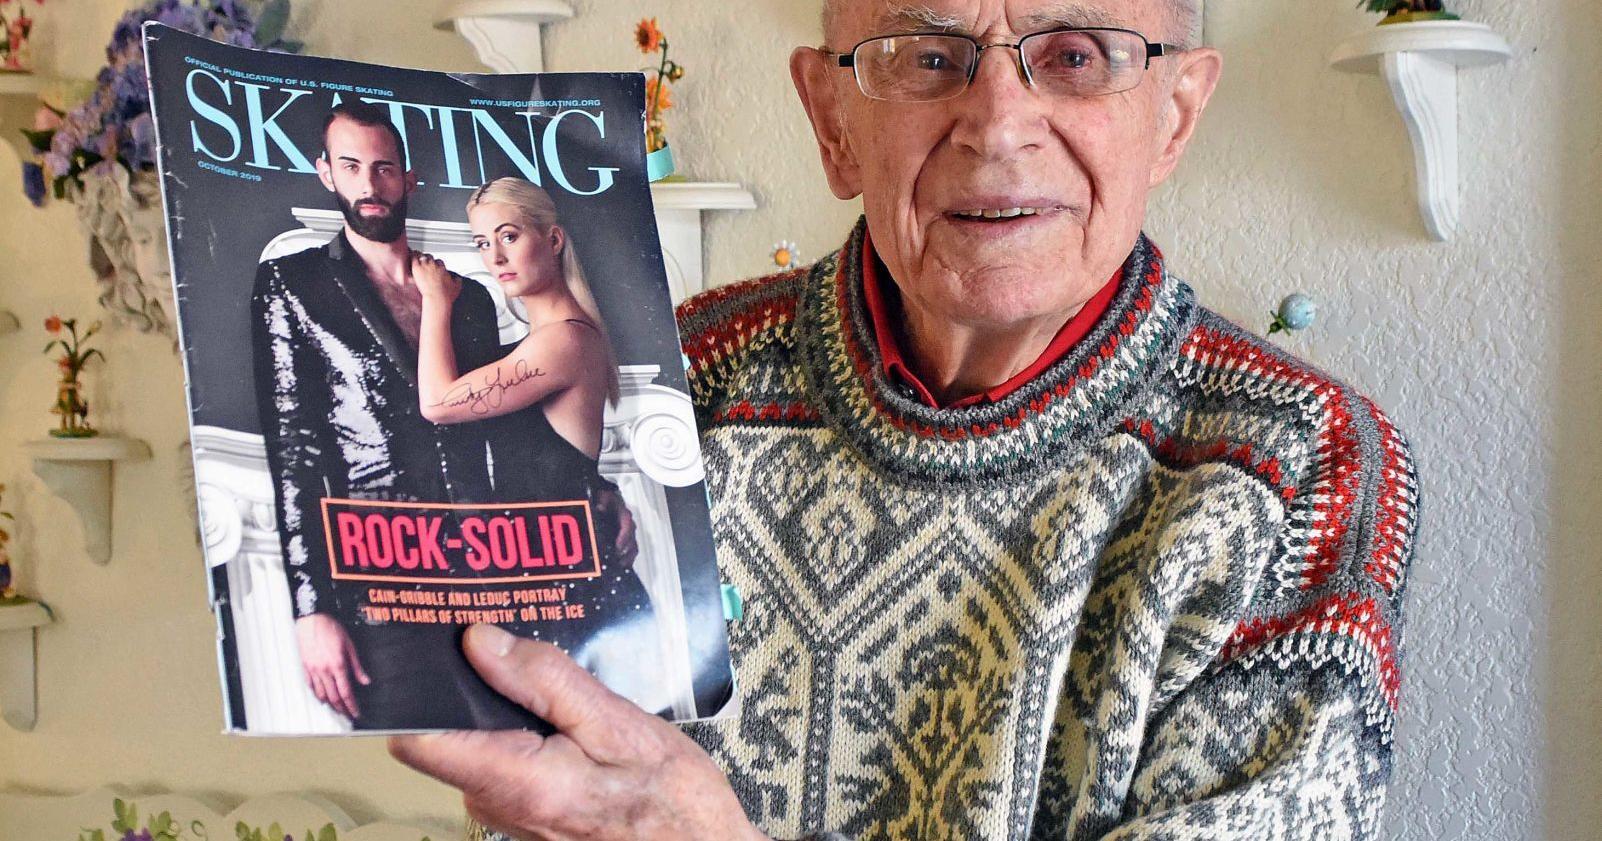 Bismarck grandfather of Olympics-bound figure skater eager to cheer on pair